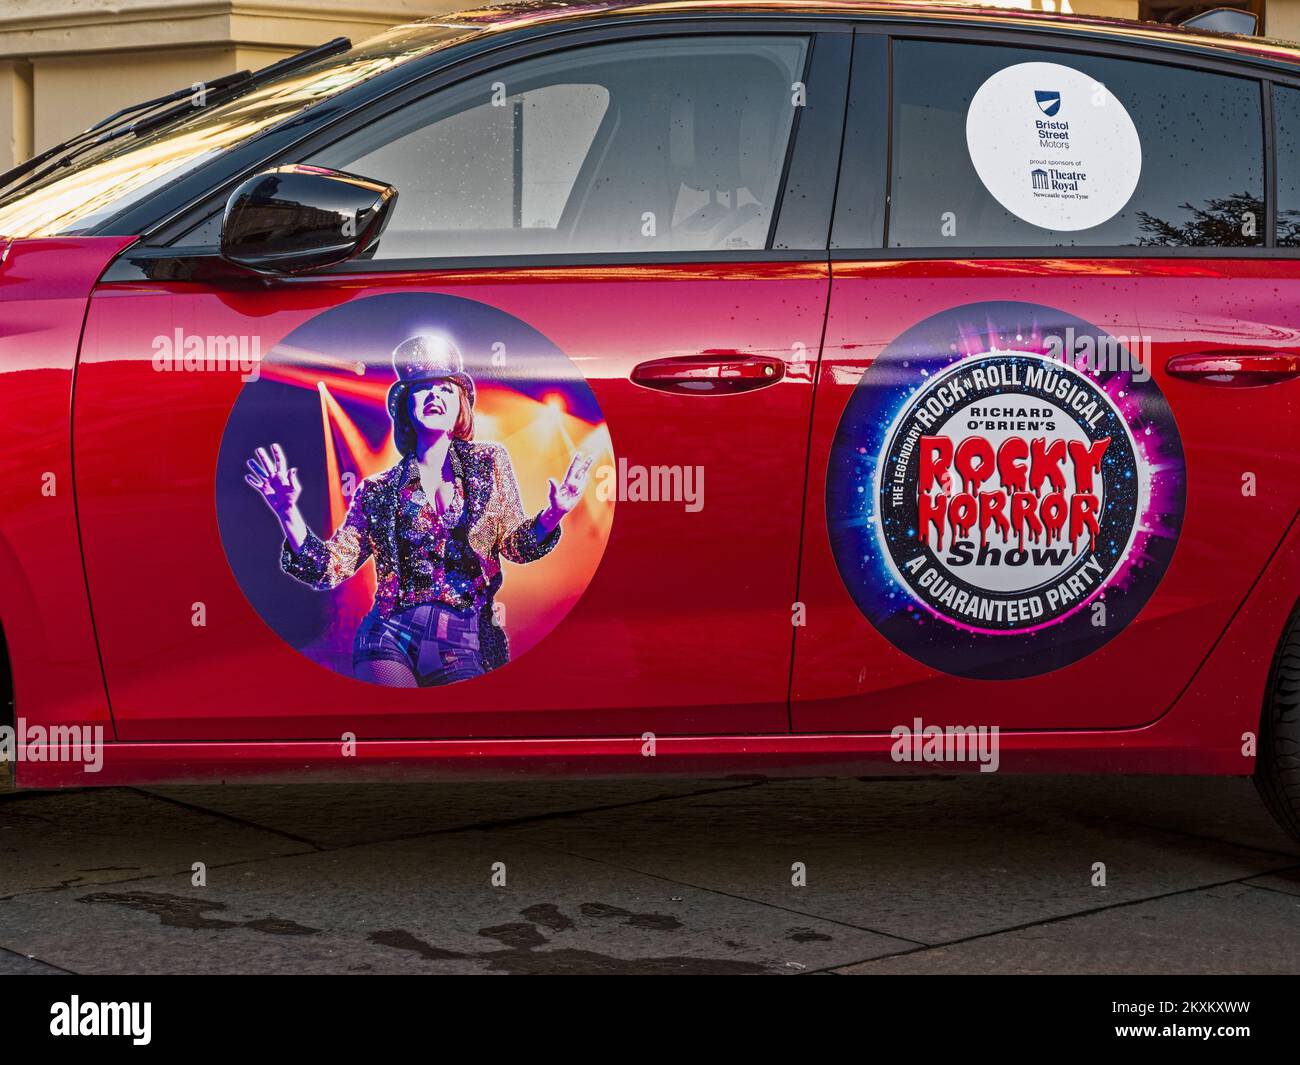 Rocky Horror Show advertisment on vehicle outside the Theatre Royal, Newcastle upon Tyne, UK Stock Photo